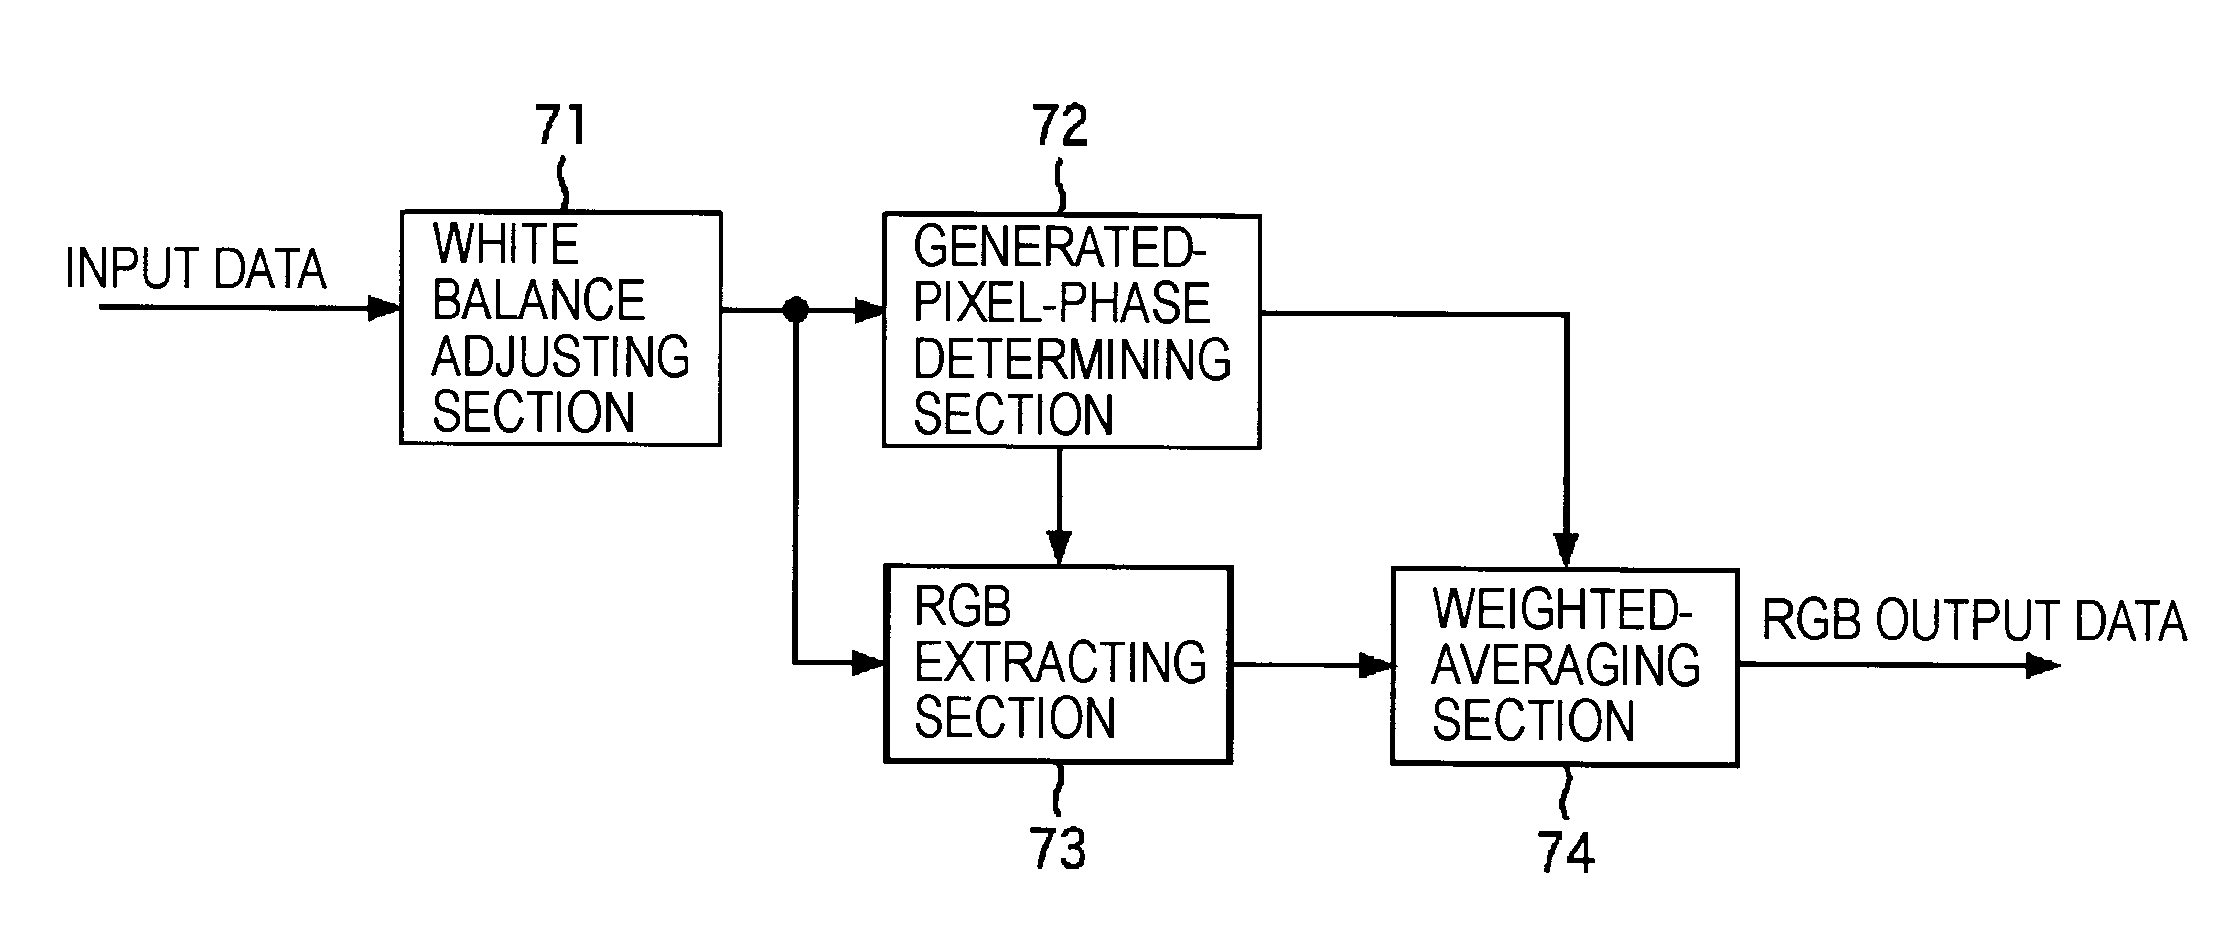 Imaging apparatus and method for approximating color matching functions